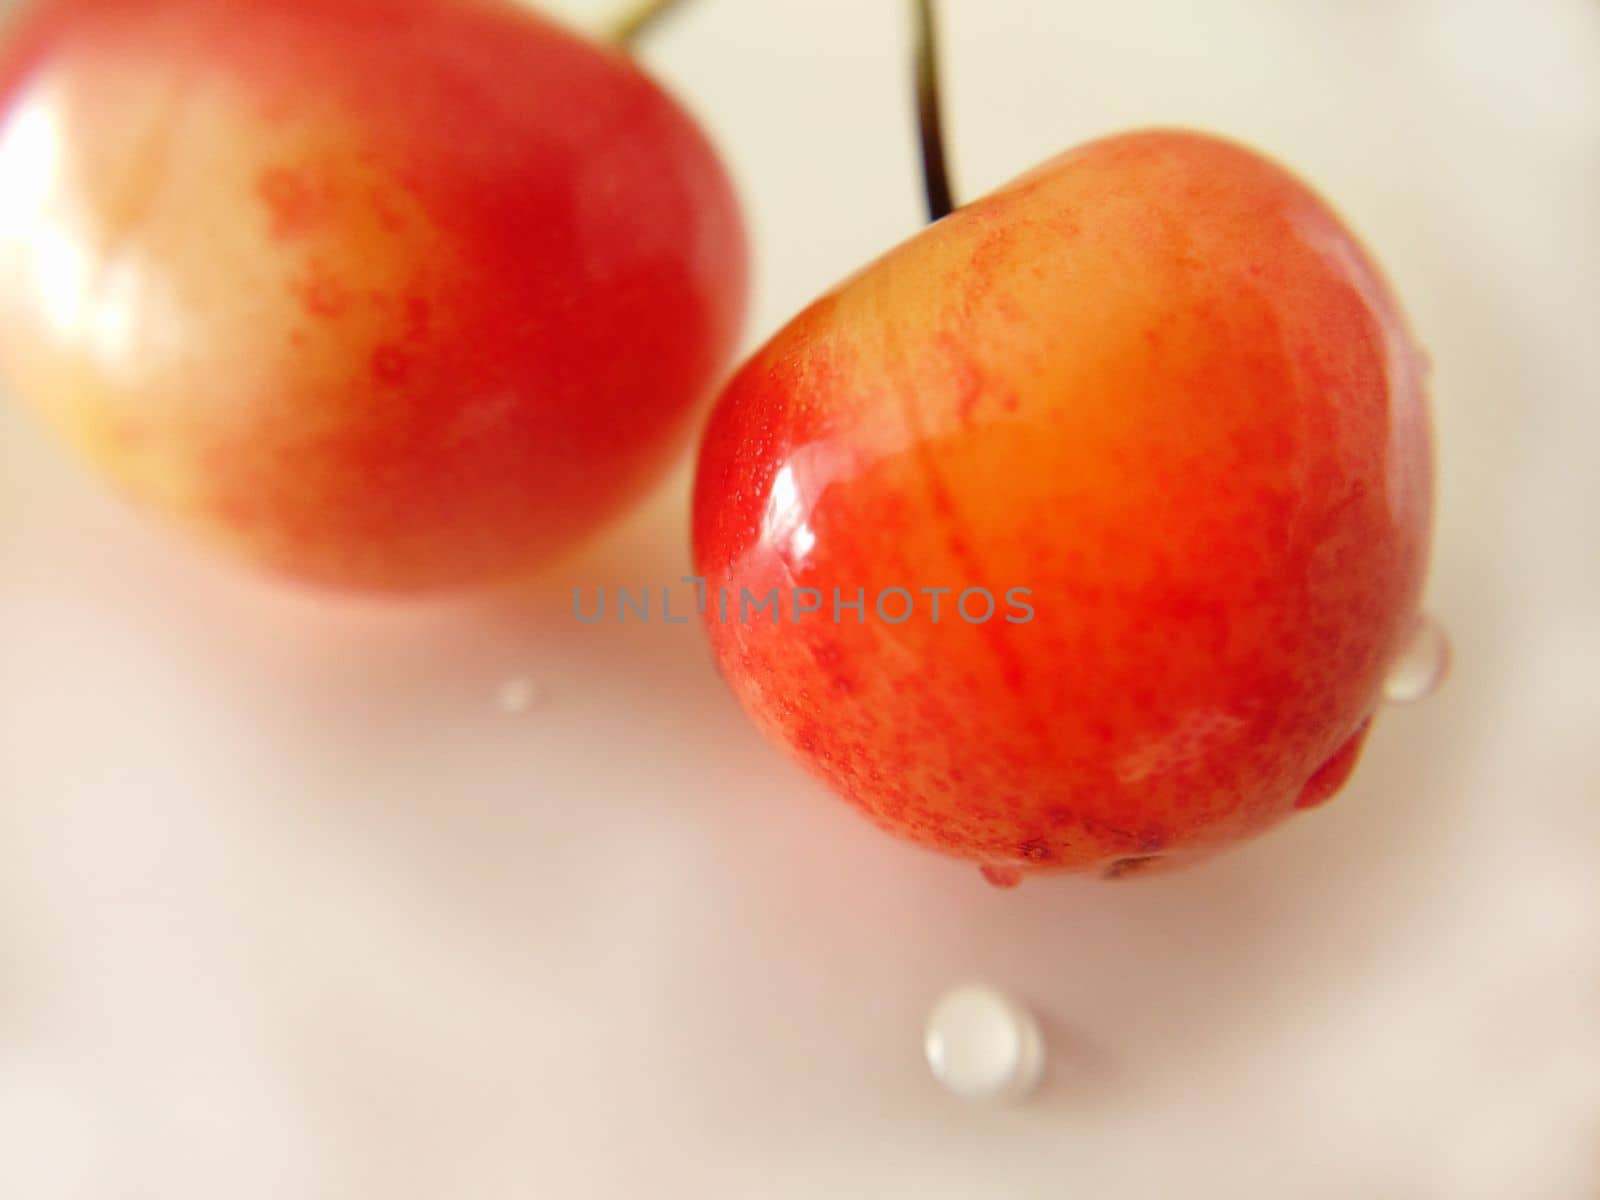 Two yellow-red cherries close-up selective focus by Mastak80